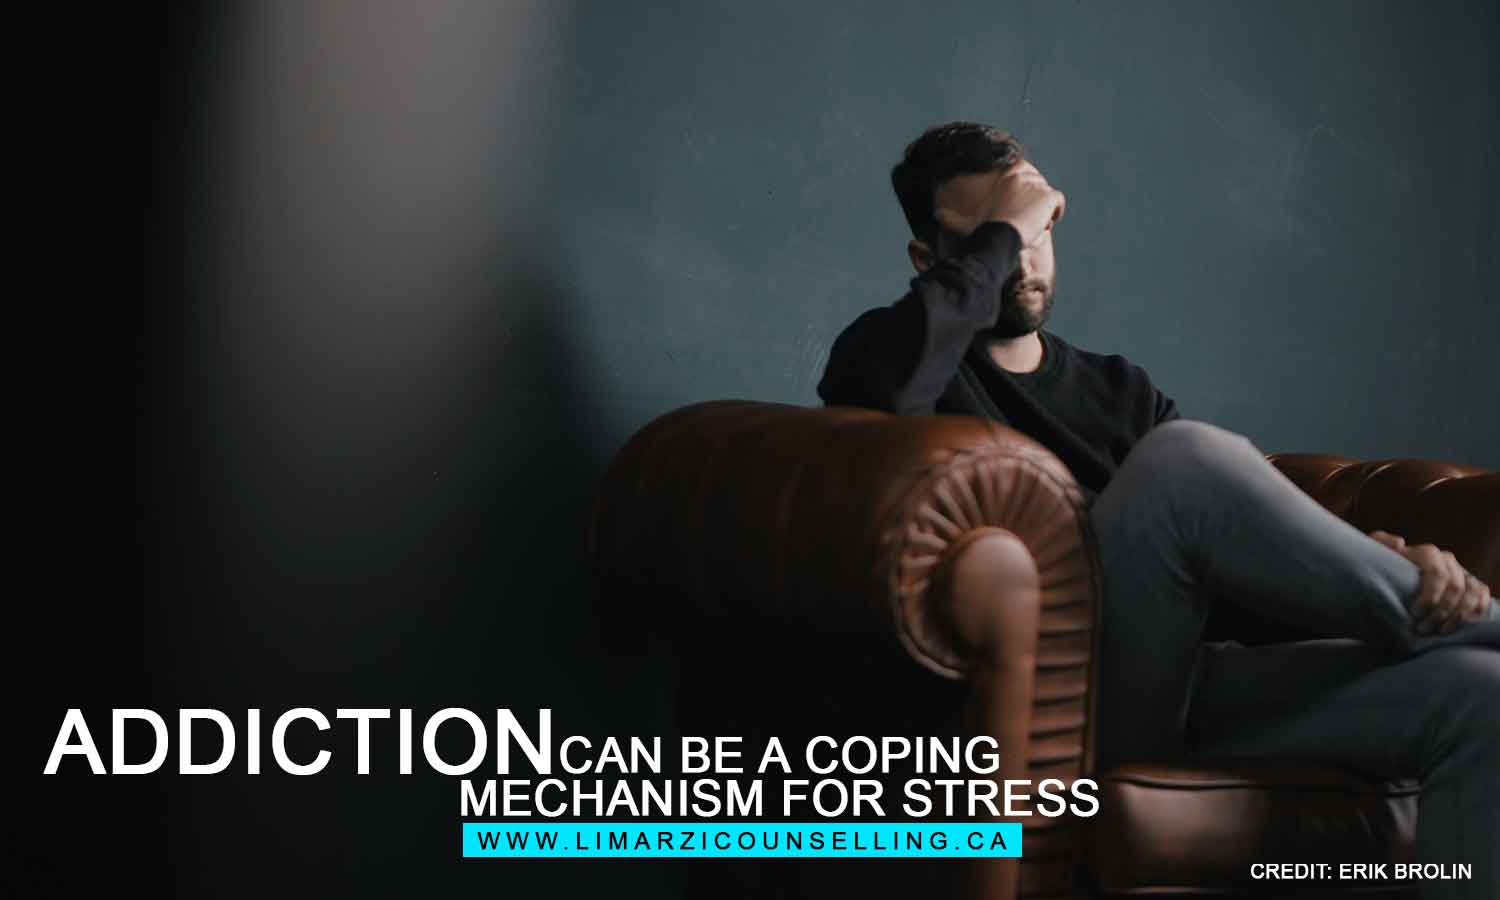 Addiction can be a coping mechanism for stress